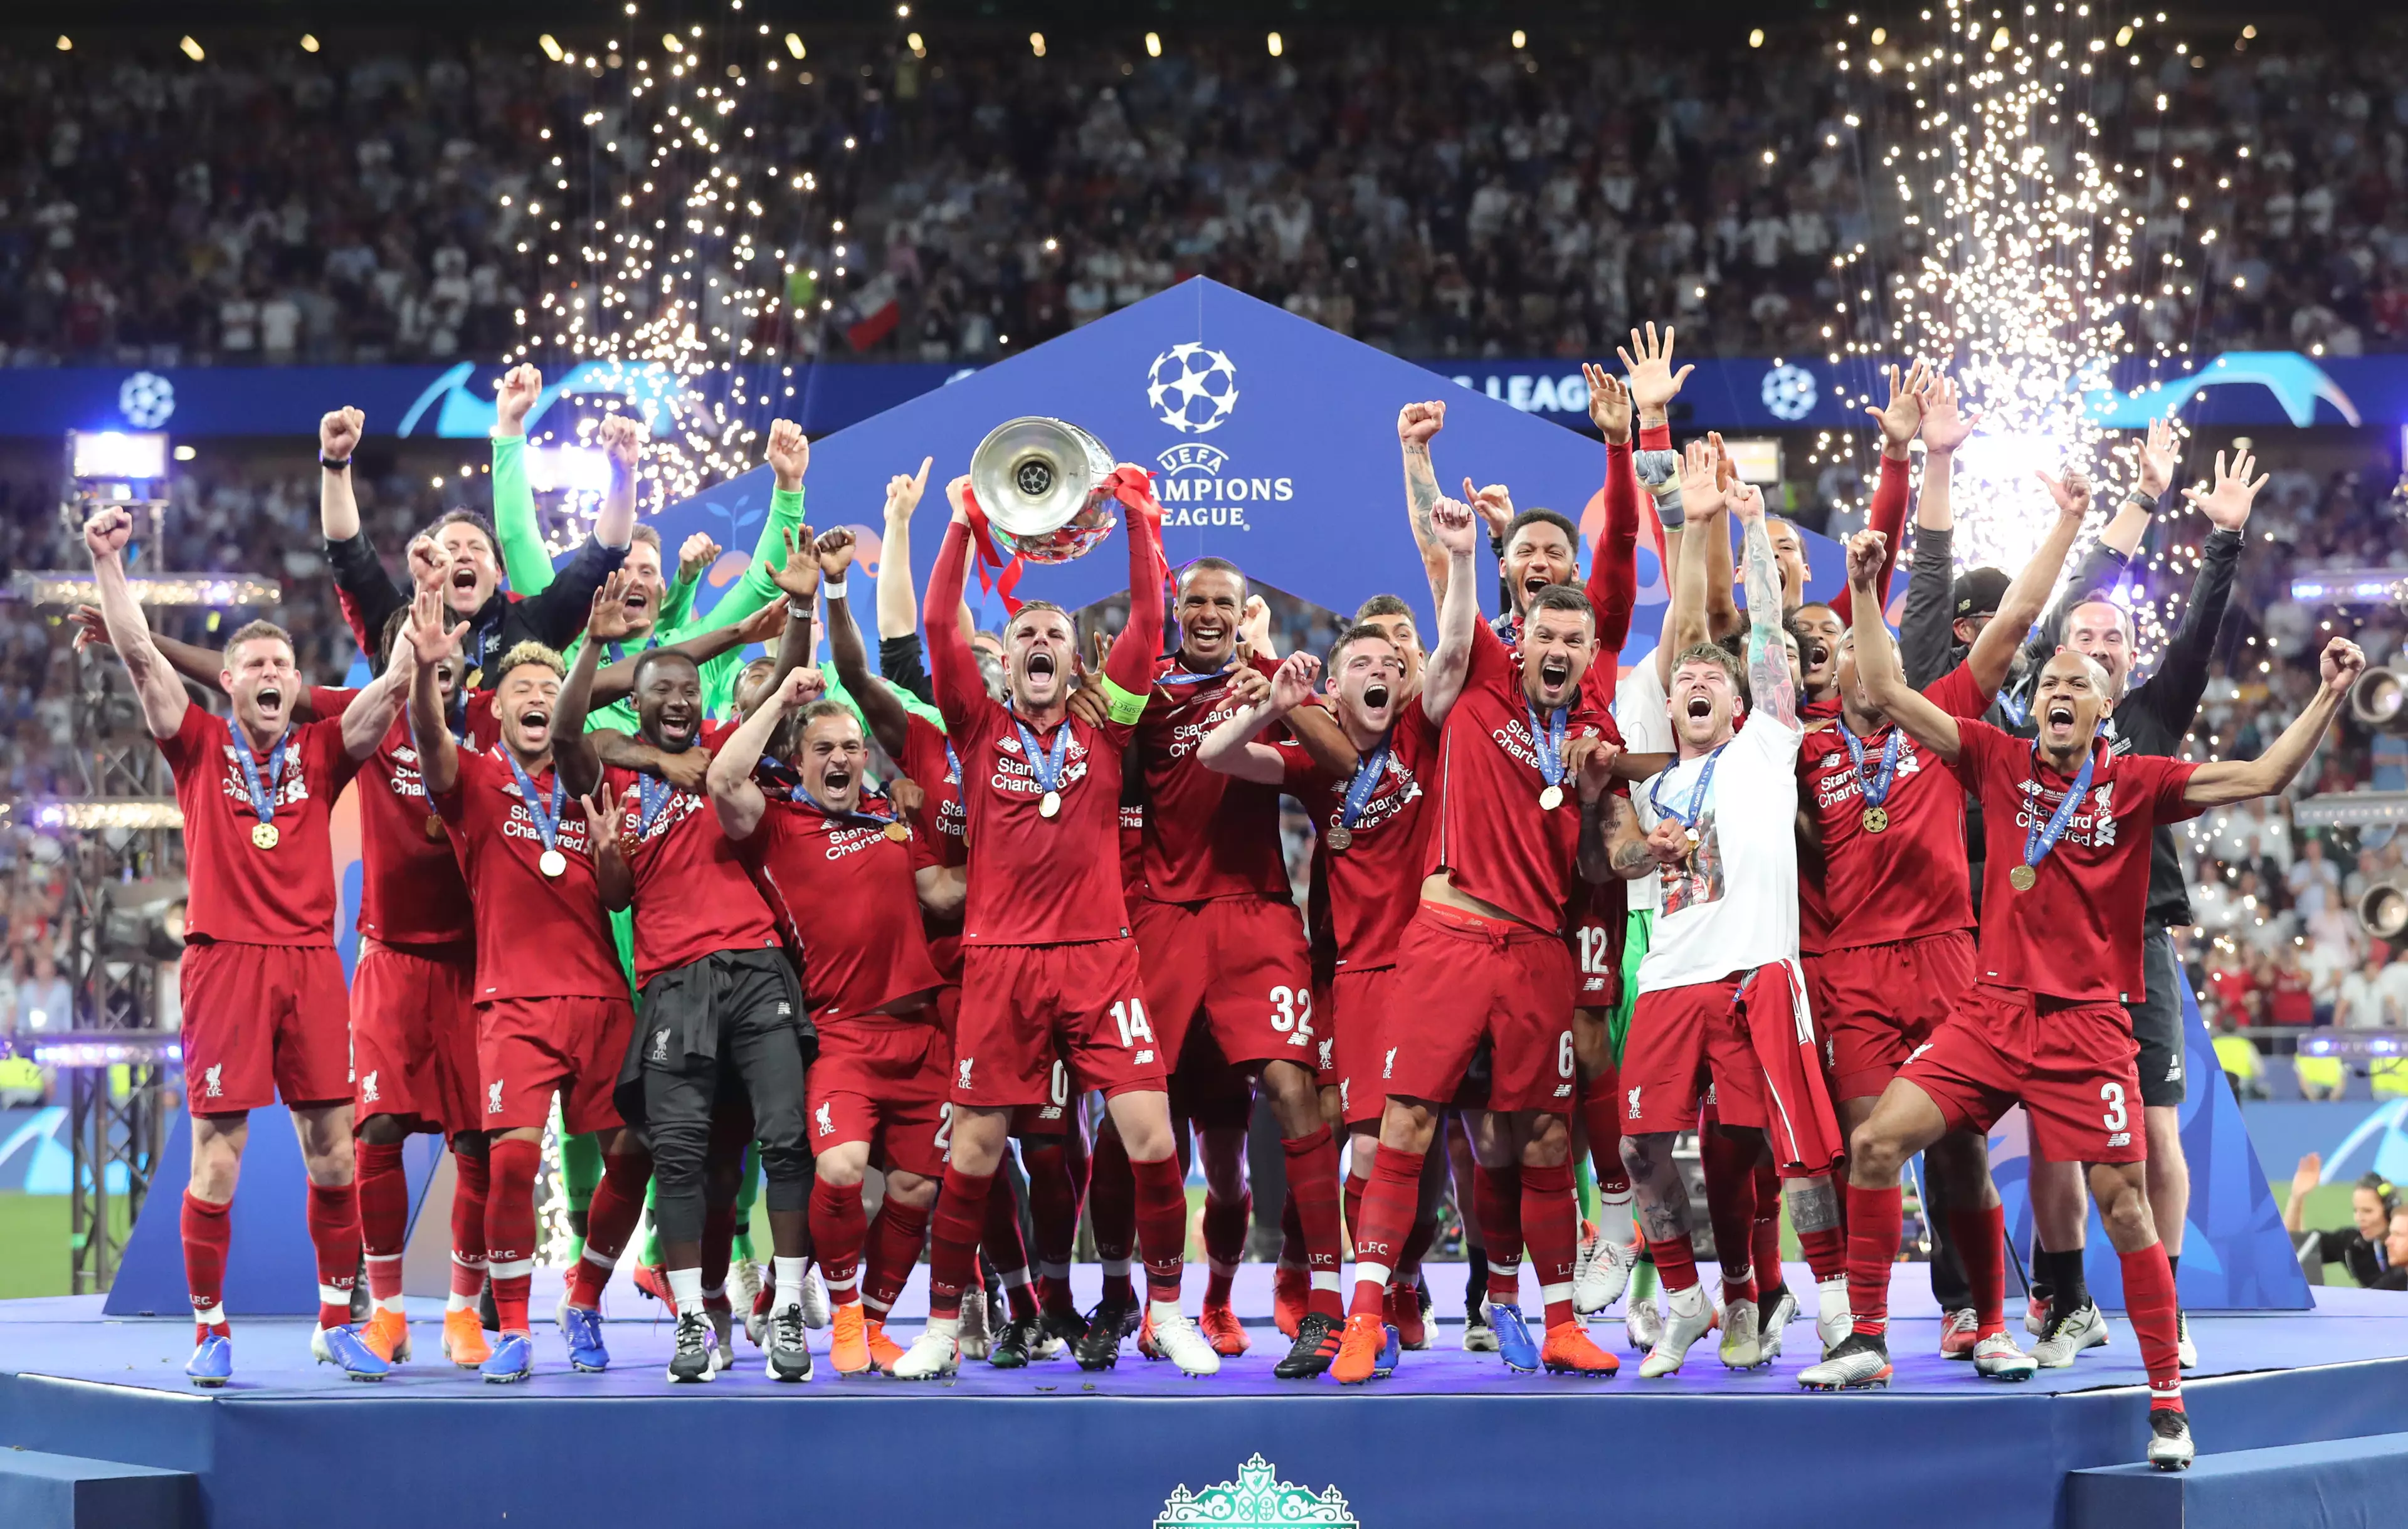 Liverpool won the Champions League in Madrid in June and will face Napoli, Salzburg and Genk in the group stages this year